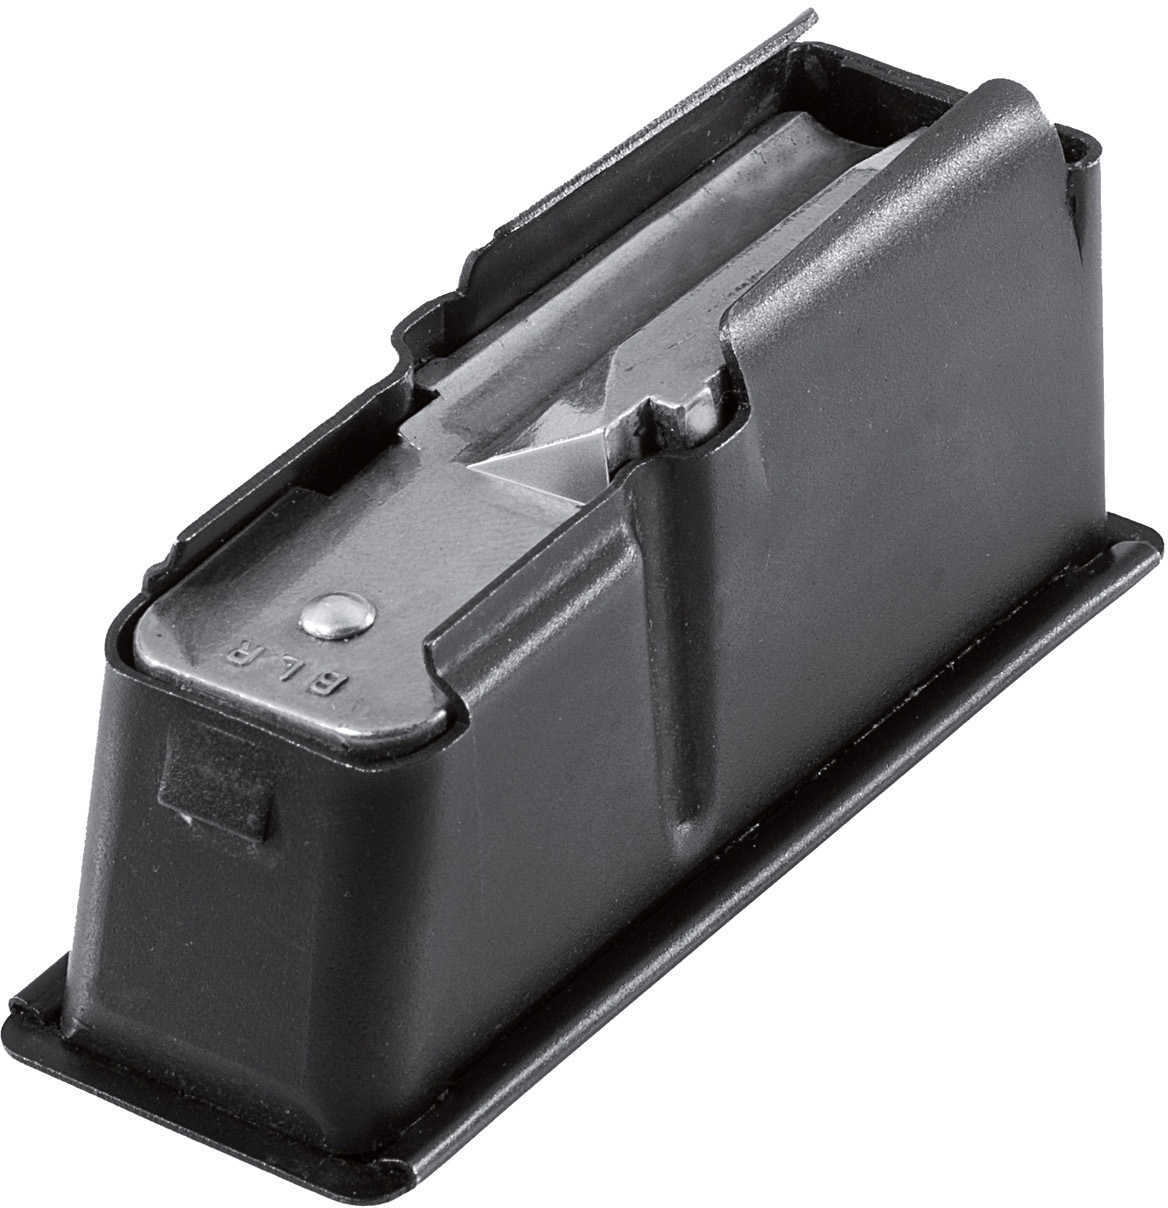 Browning 4 Round 30-06 Springfield BLR 81 Magazine With Black Finish Md: 112026026